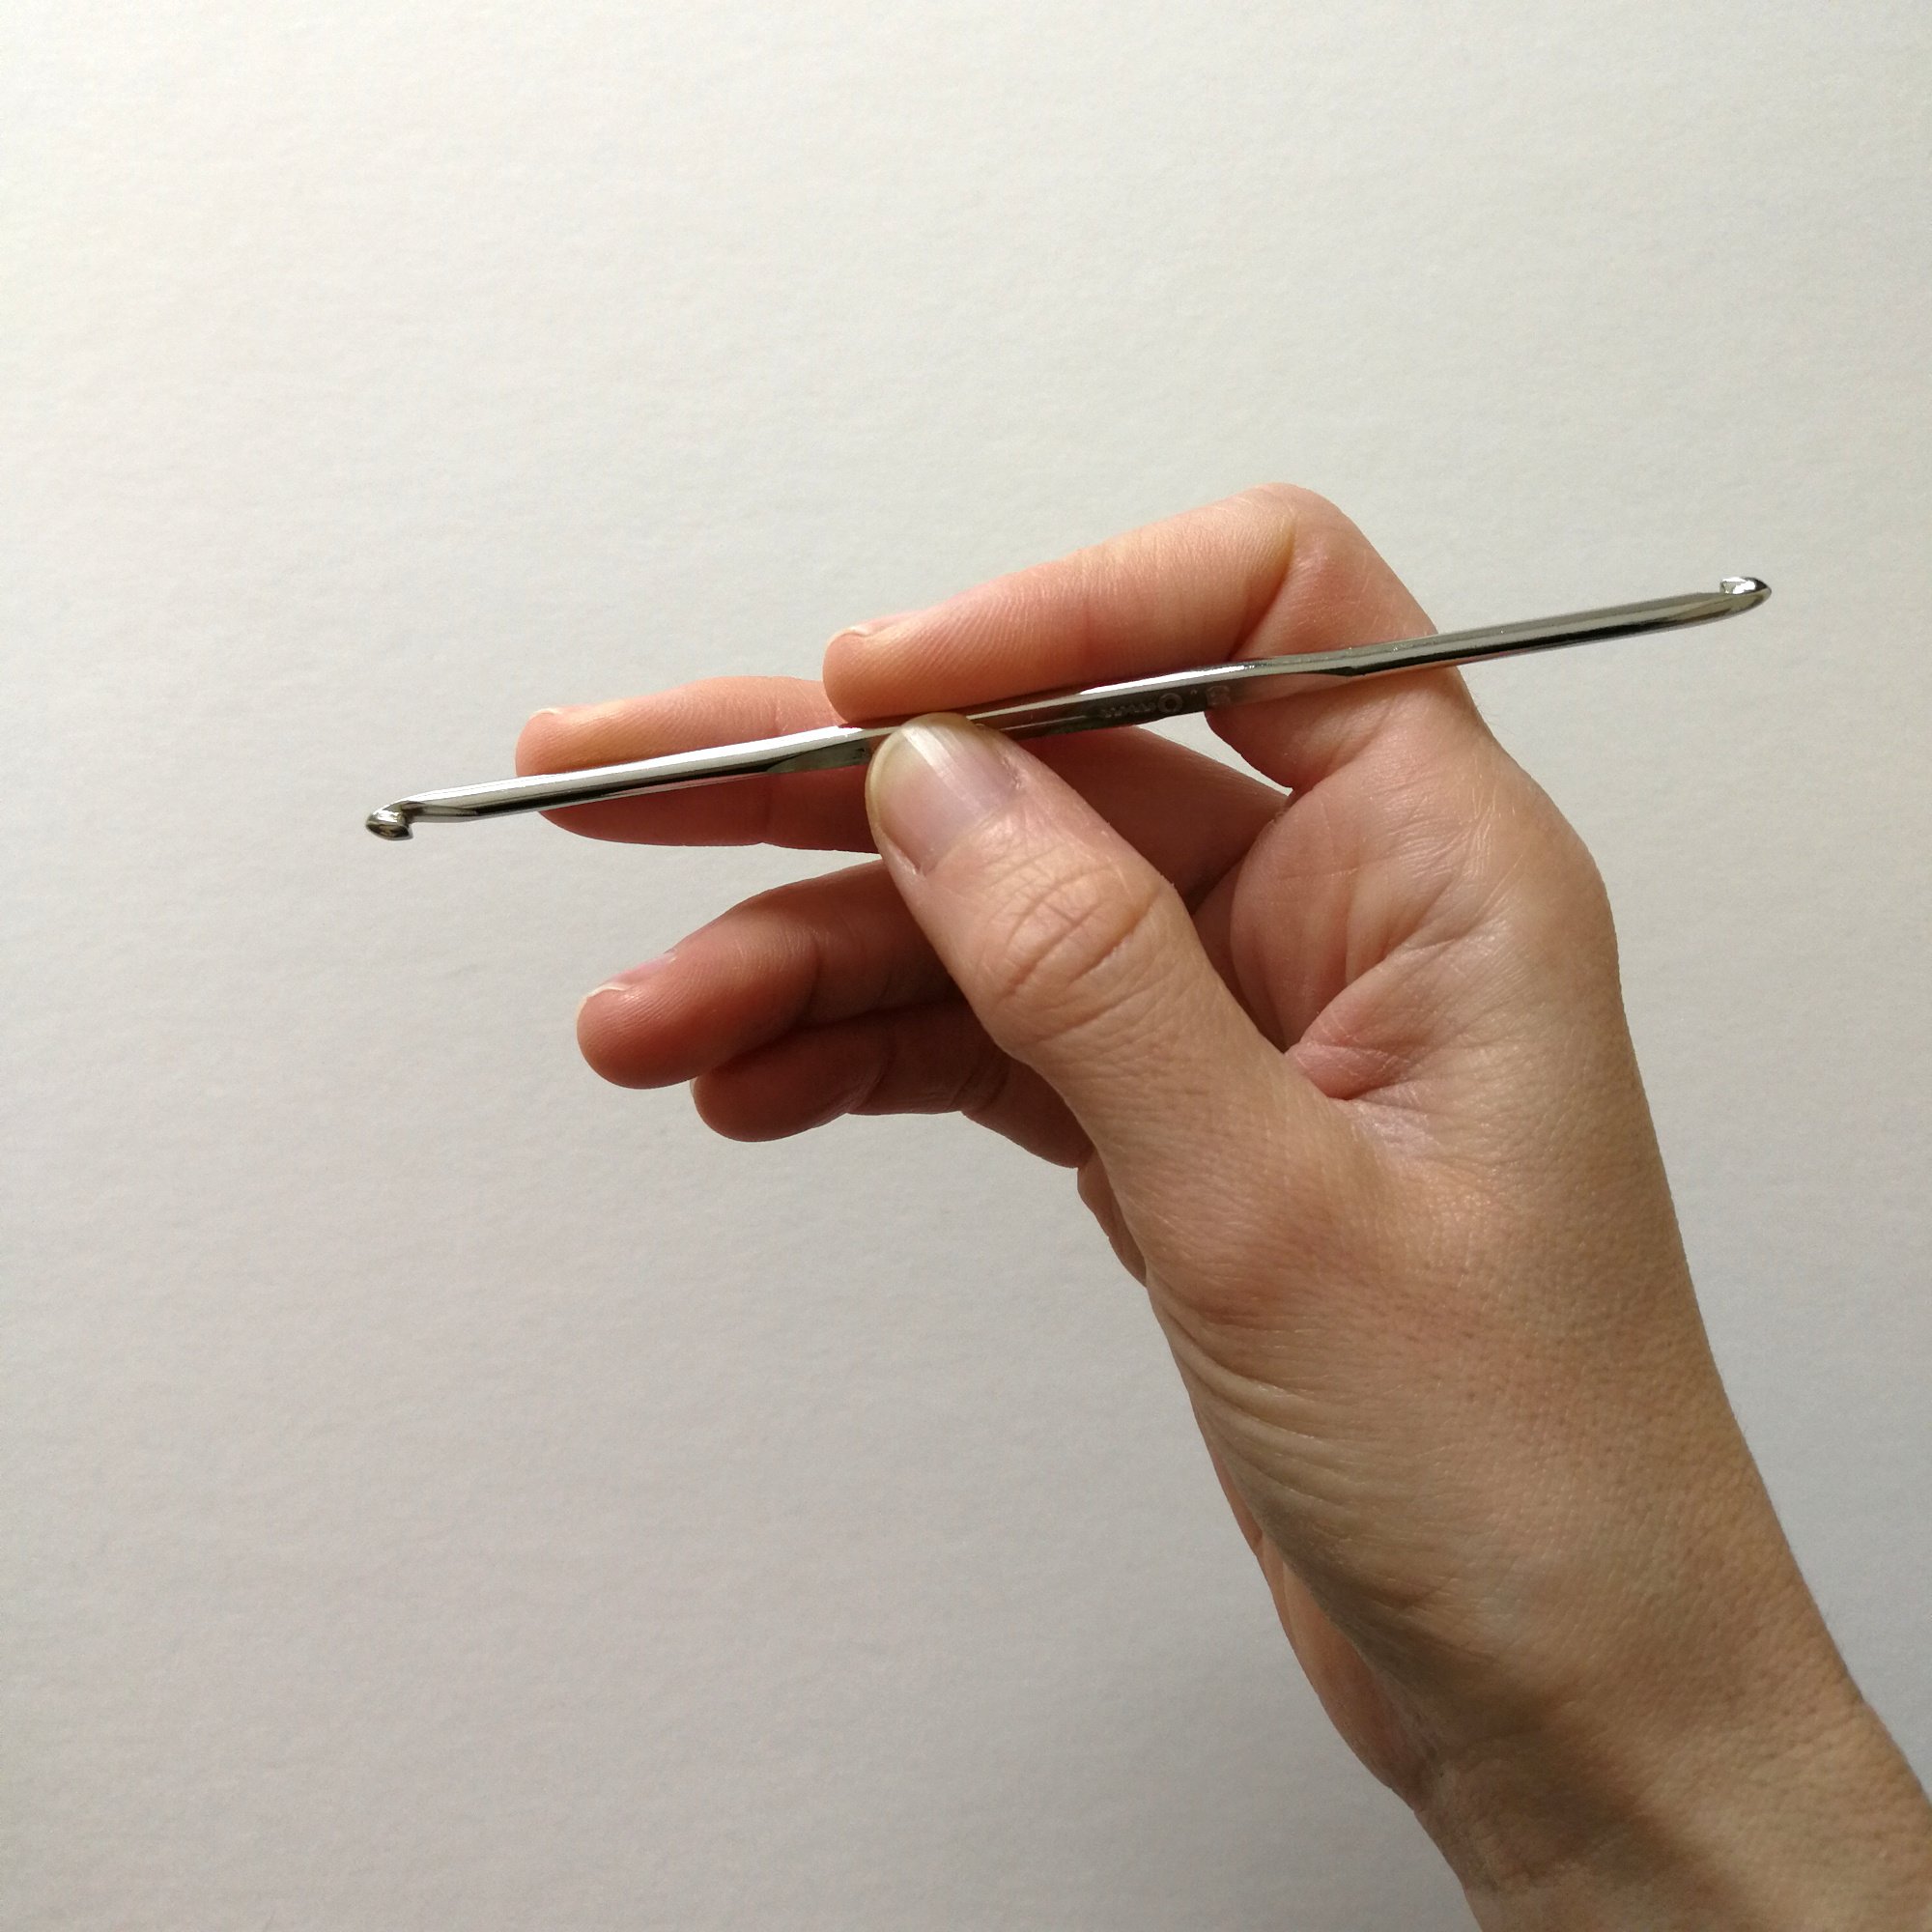 How to Hold a Crochet Hook - Tutorial One